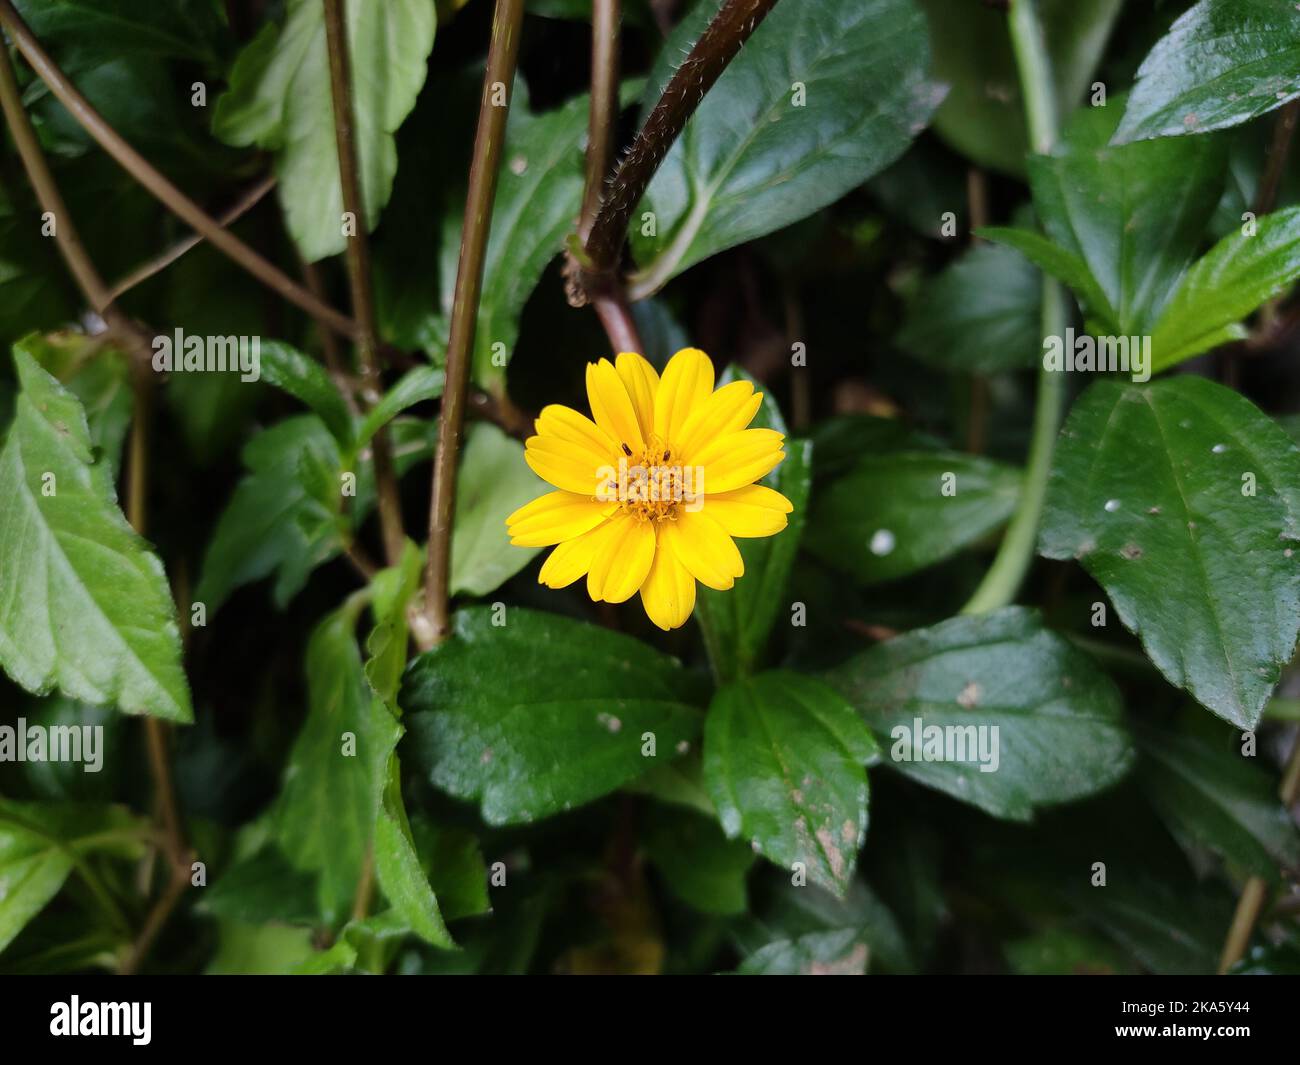 Golden yellow Wedelia flower in the midlle of green leaves, isolated picture Stock Photo